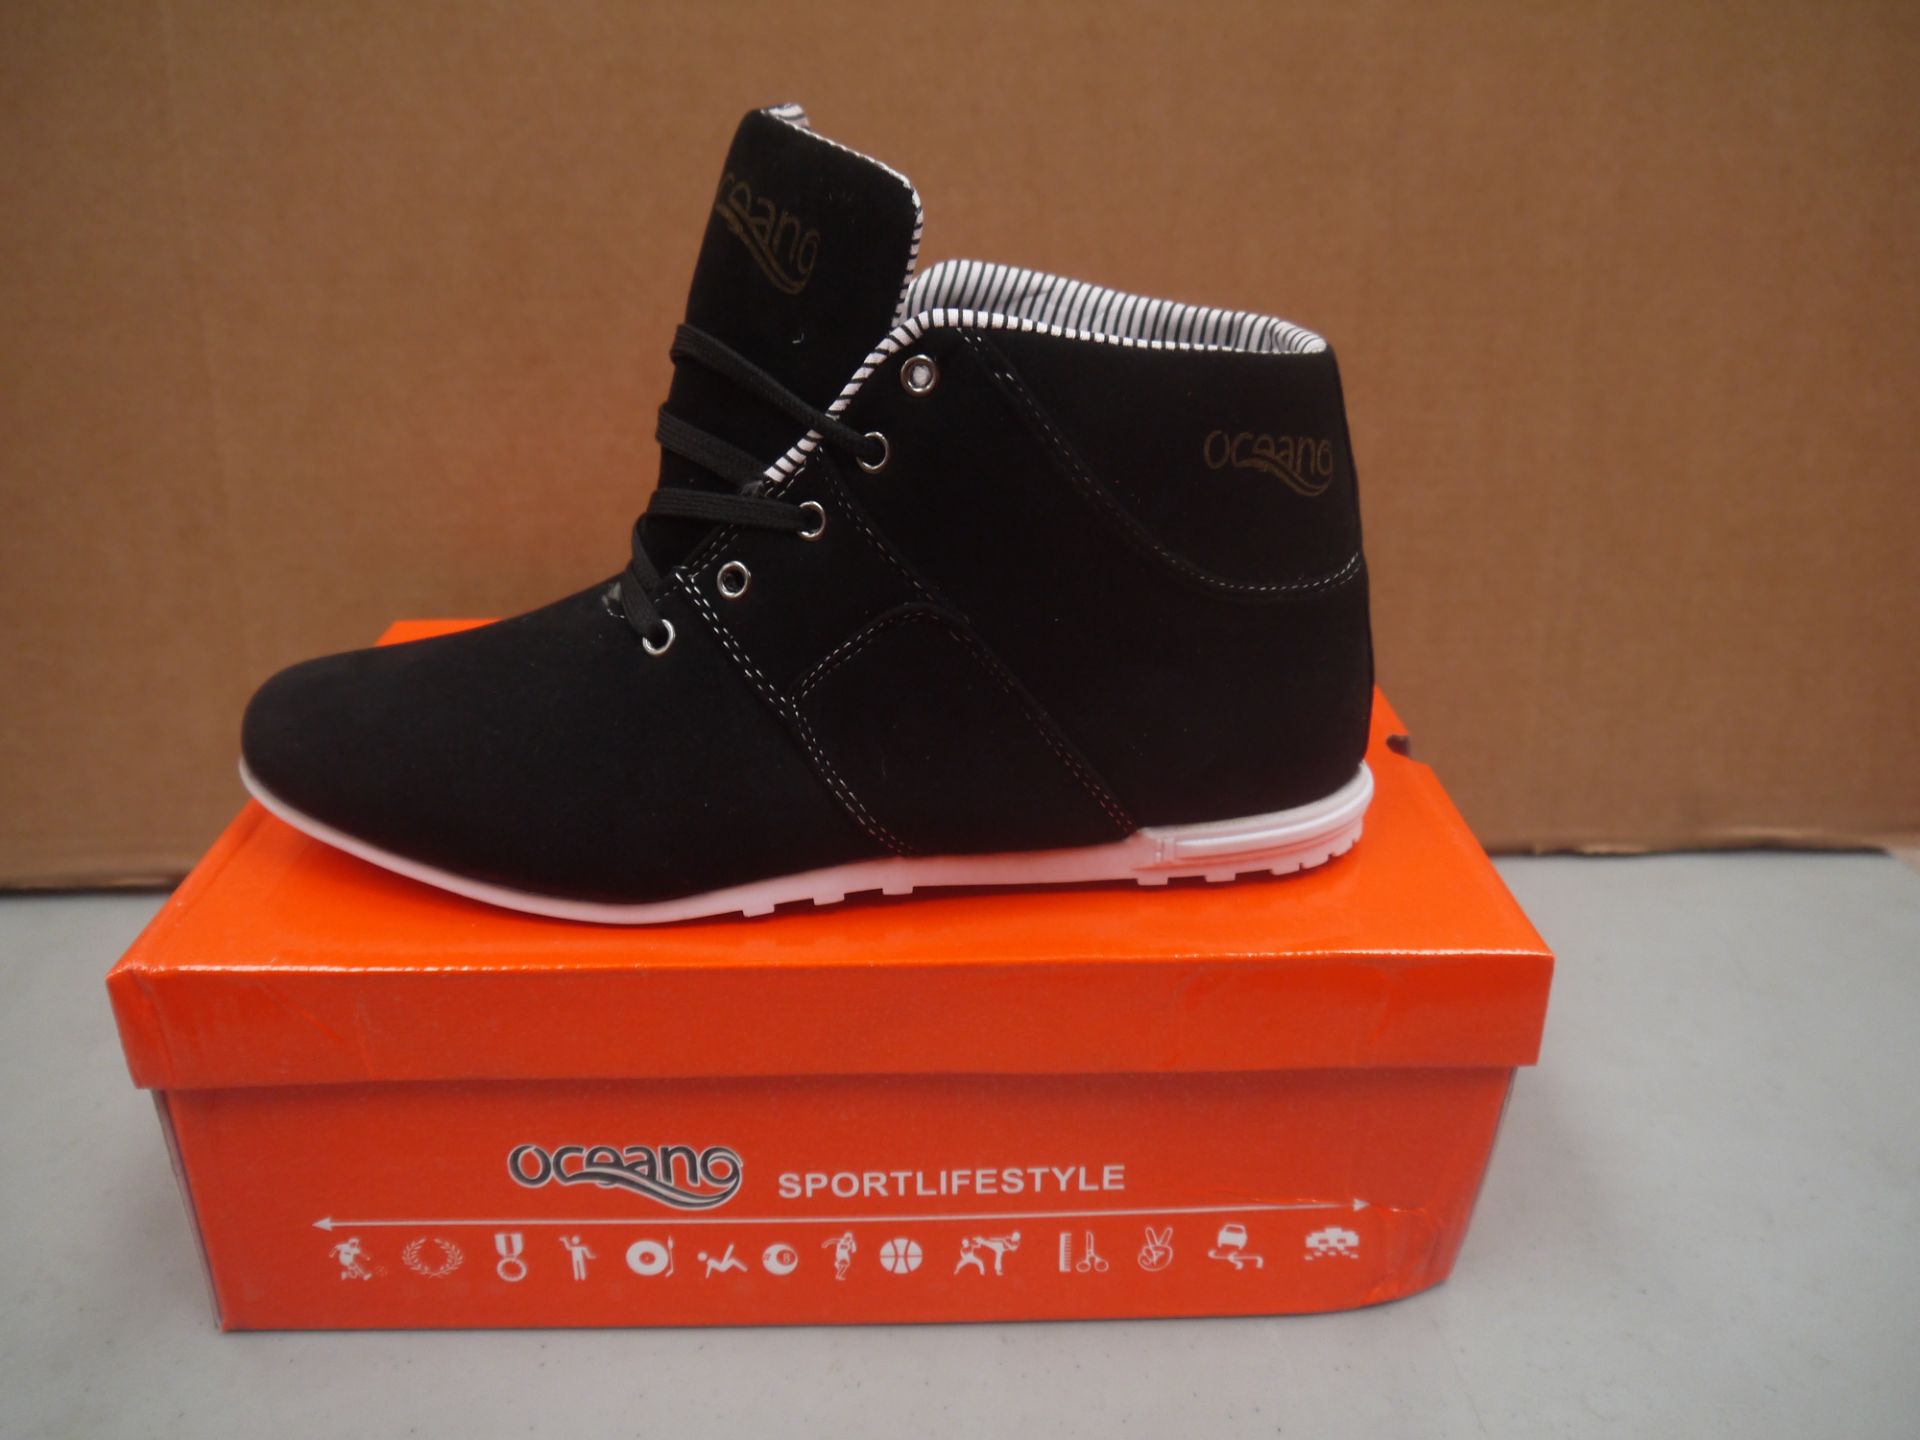 Mens Black Suede Oceano trainer style boot new and boxed size UK9